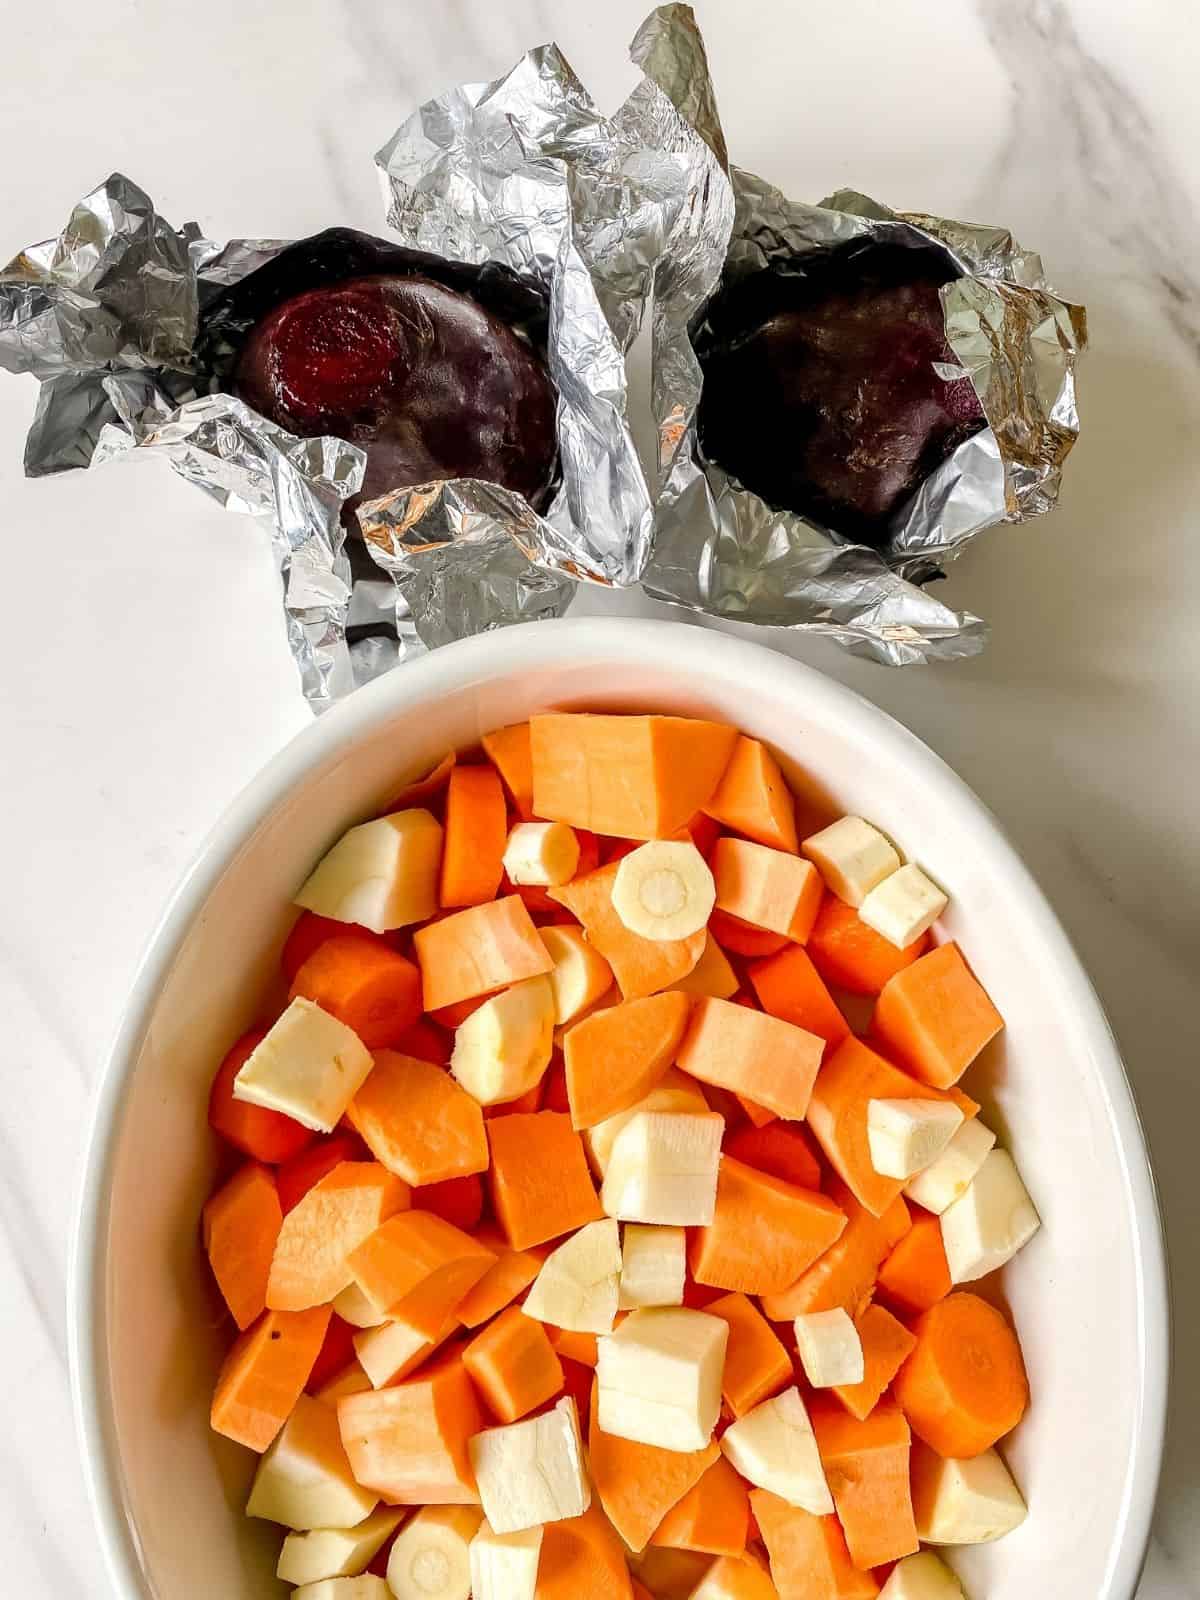 beets in foil next to a dish of vegetables.